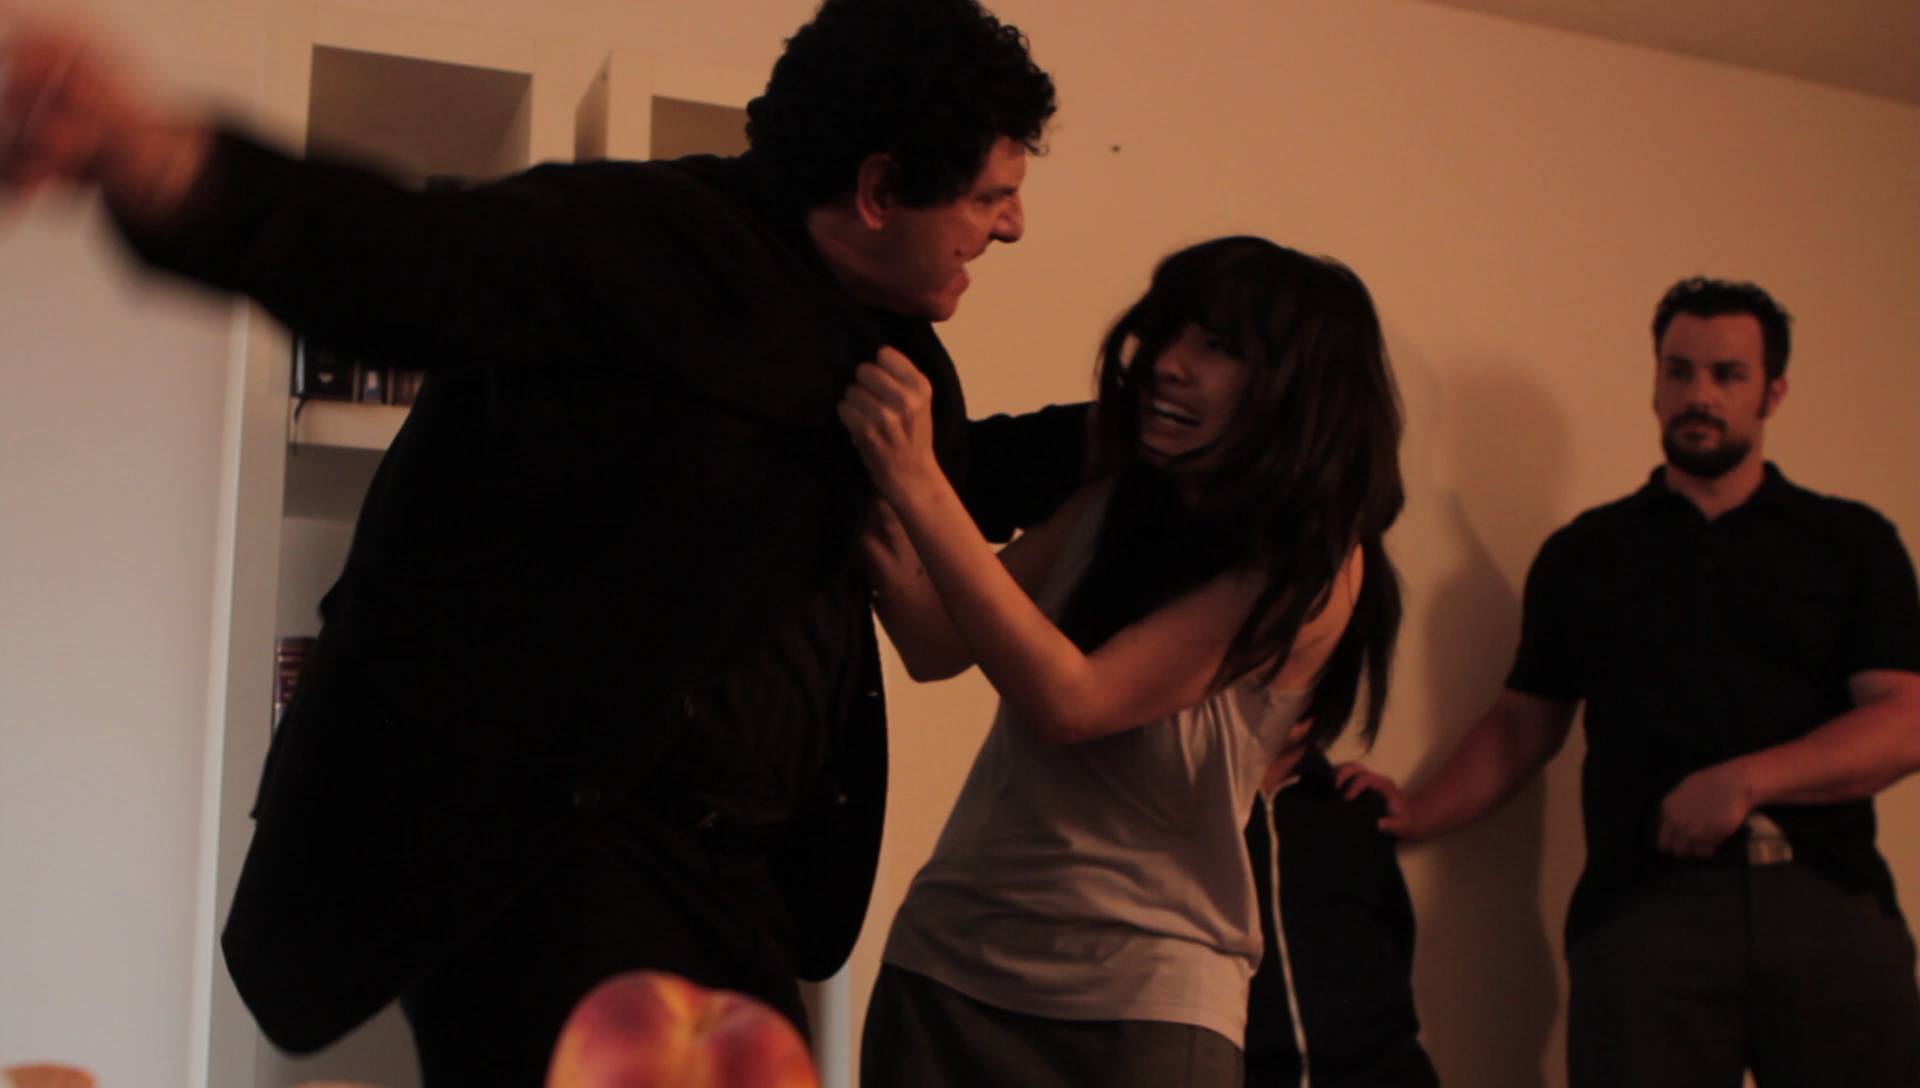 Still of Celeste Thorson (Destination X series, How I Met Your Mother, Tranzloco) and Rich Rossi in Night Bird